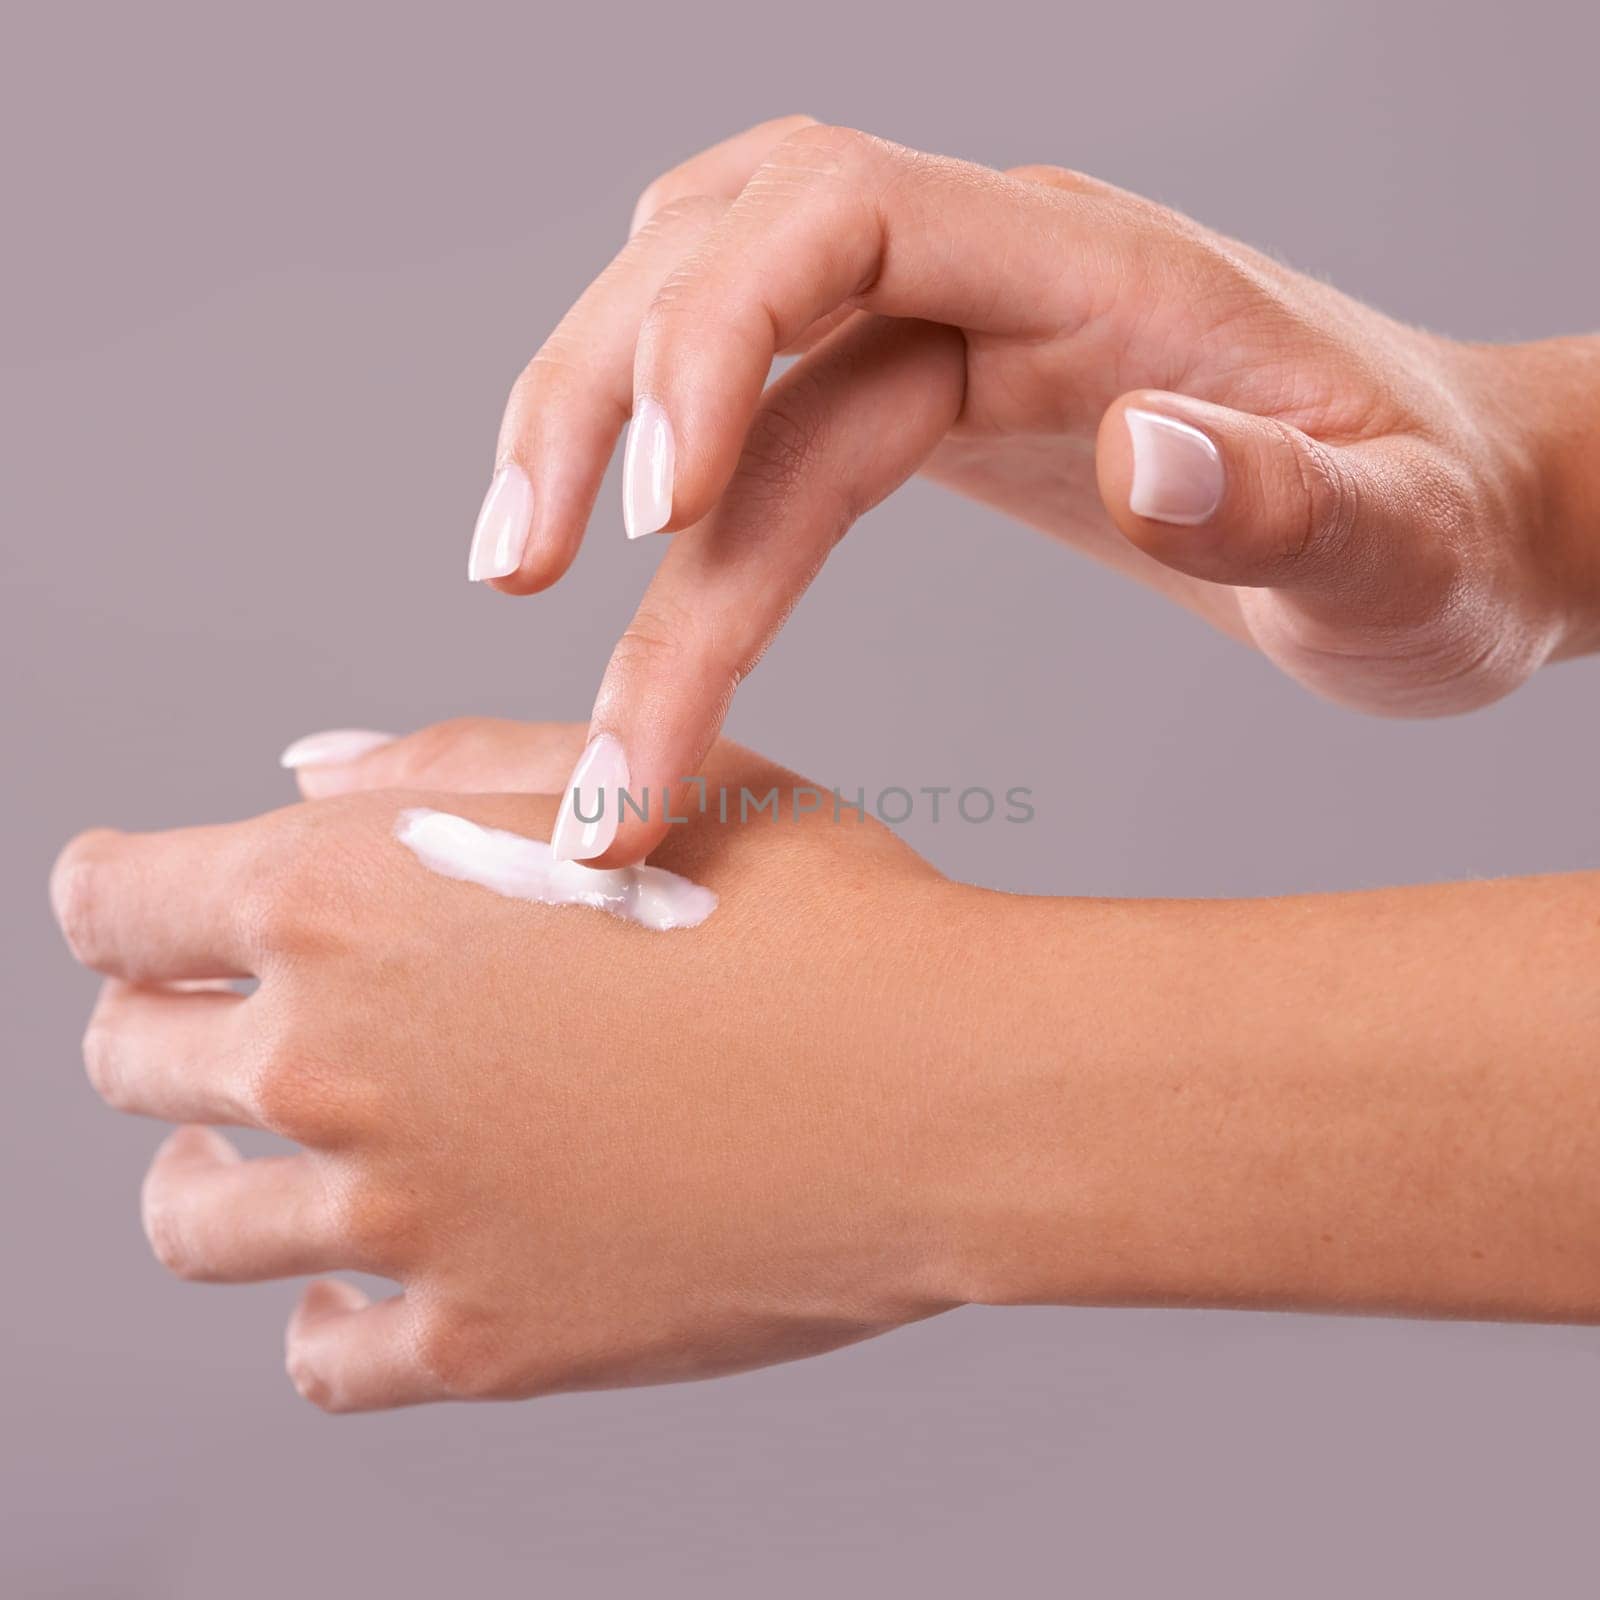 Hands, cream and beauty with woman for skincare, dermatology and wellness on grey background. Moisturizer, lotion or sunscreen with nails and manicure, antiaging cosmetic product and skin health.